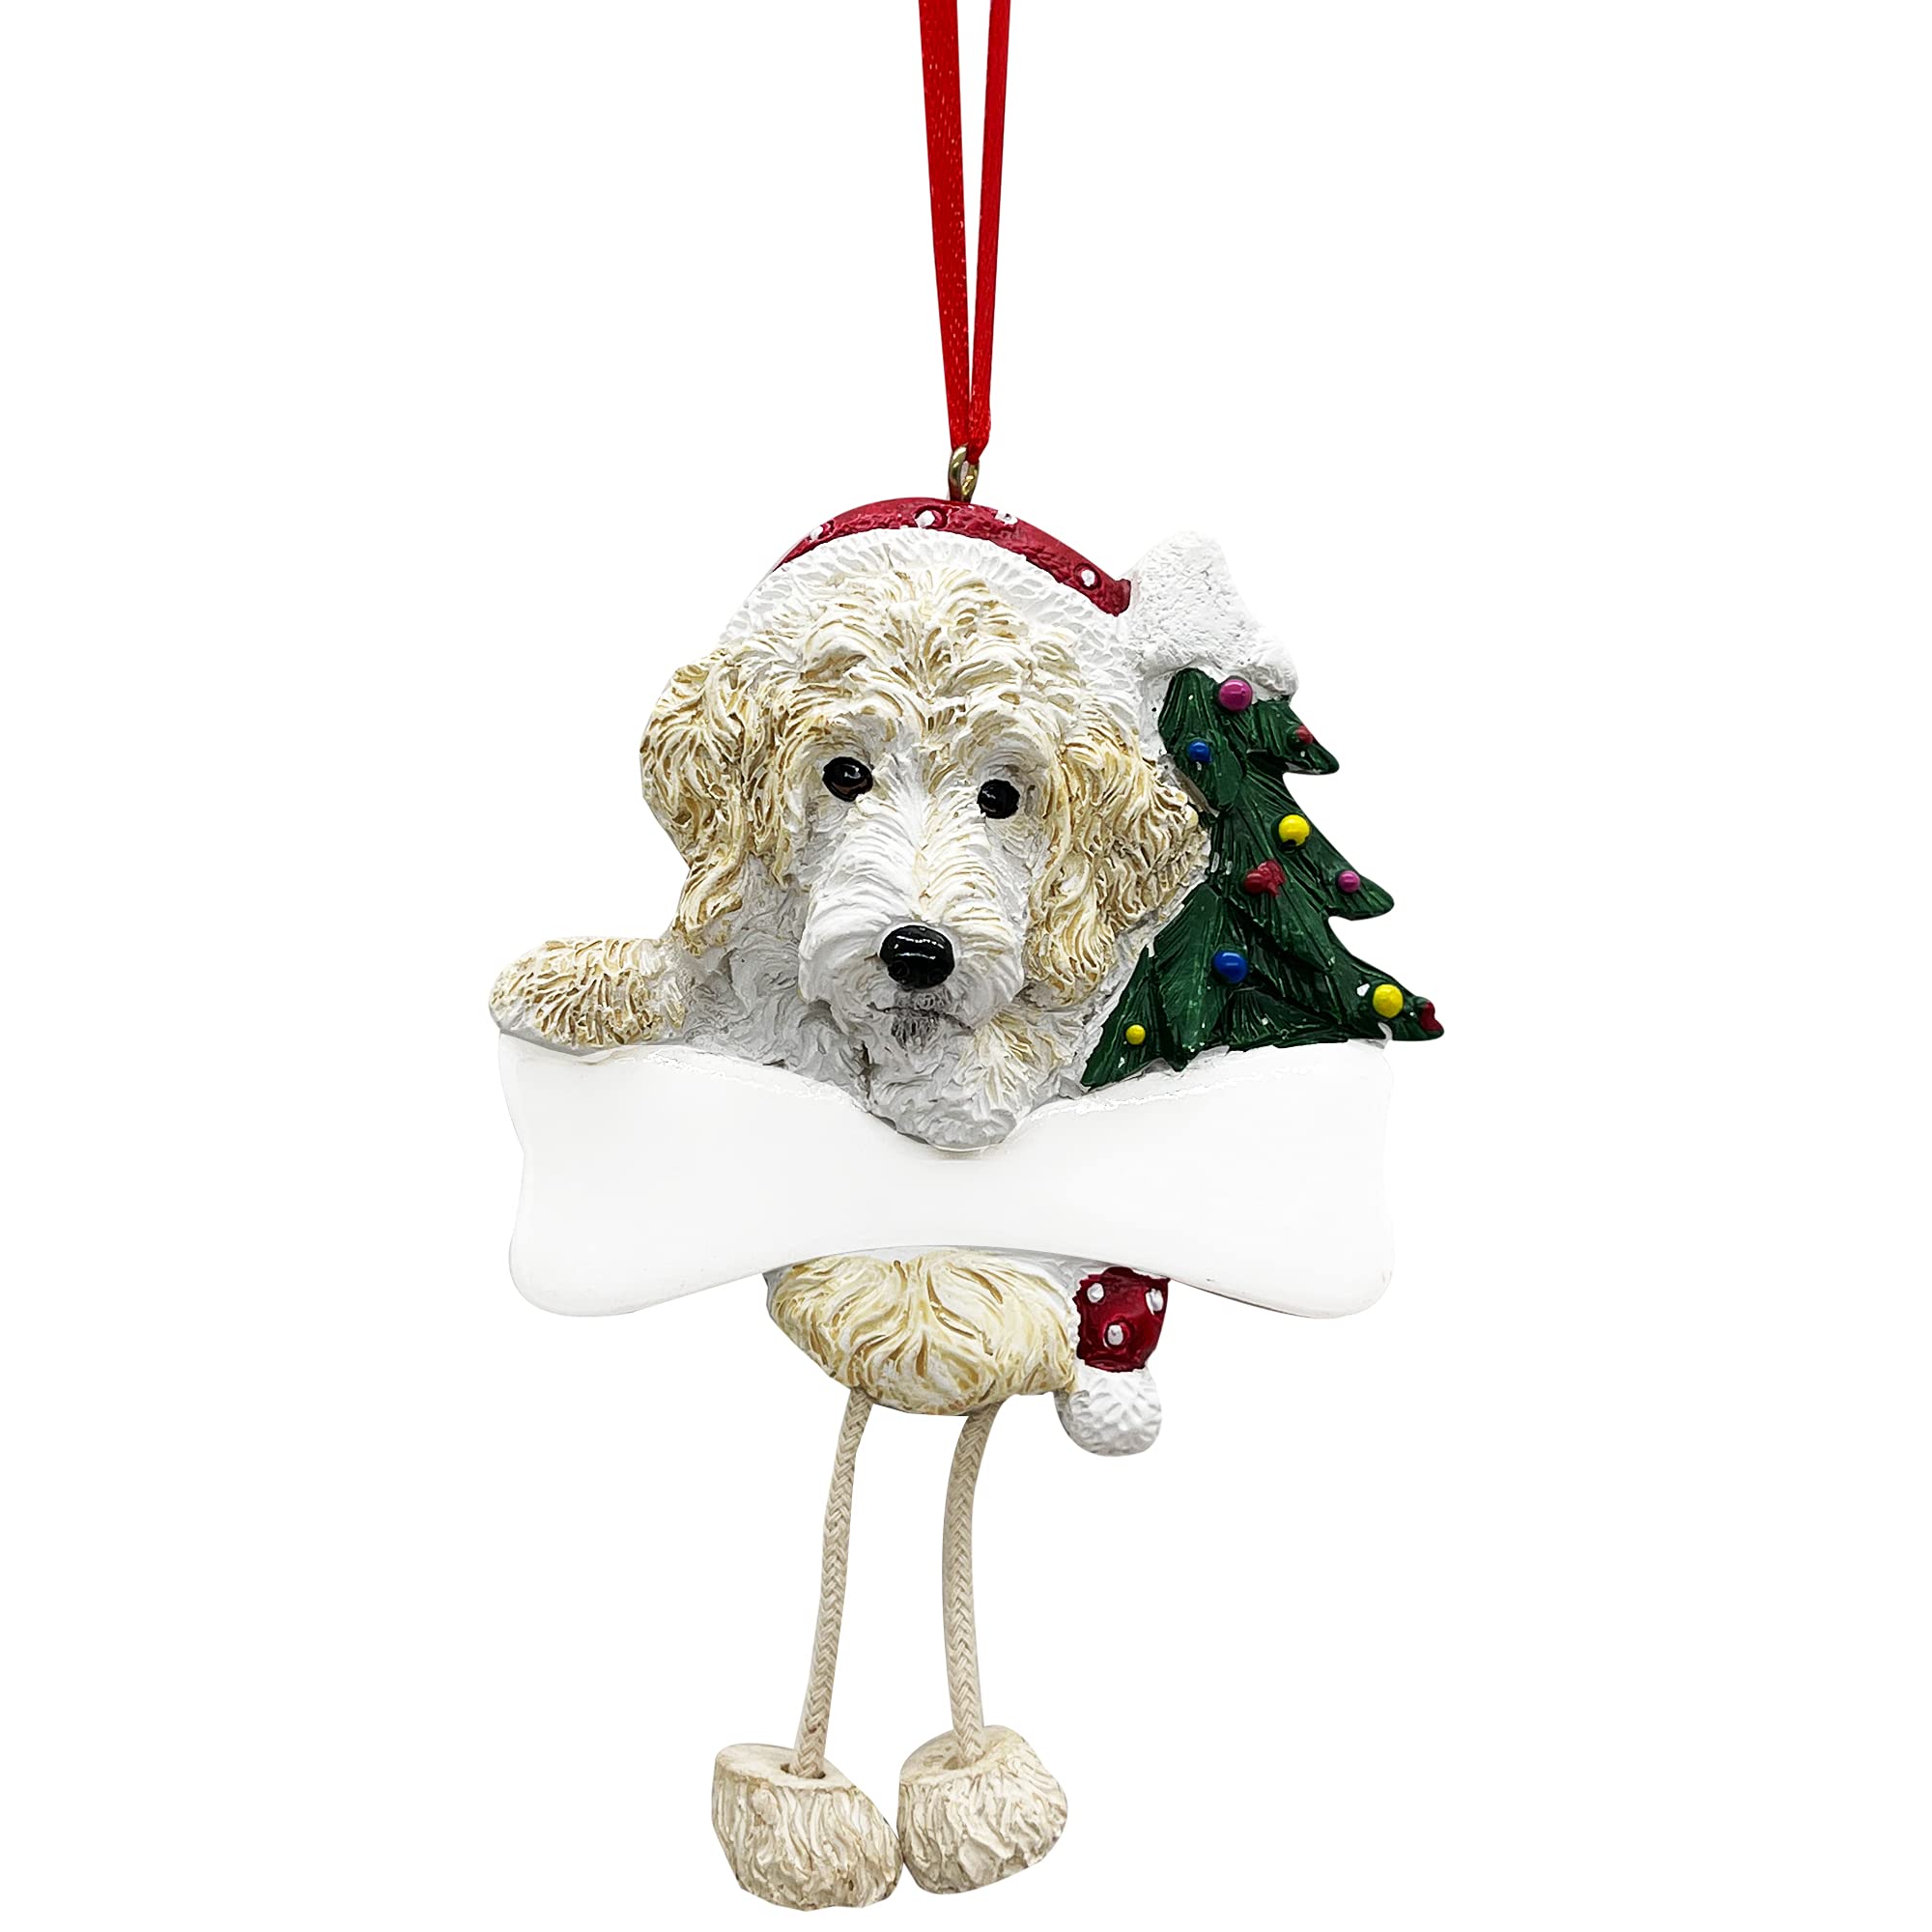 Labradoodle Ornament with Unique "Dangling Legs" Hand Painted and Easily Personalized Christmas Ornament